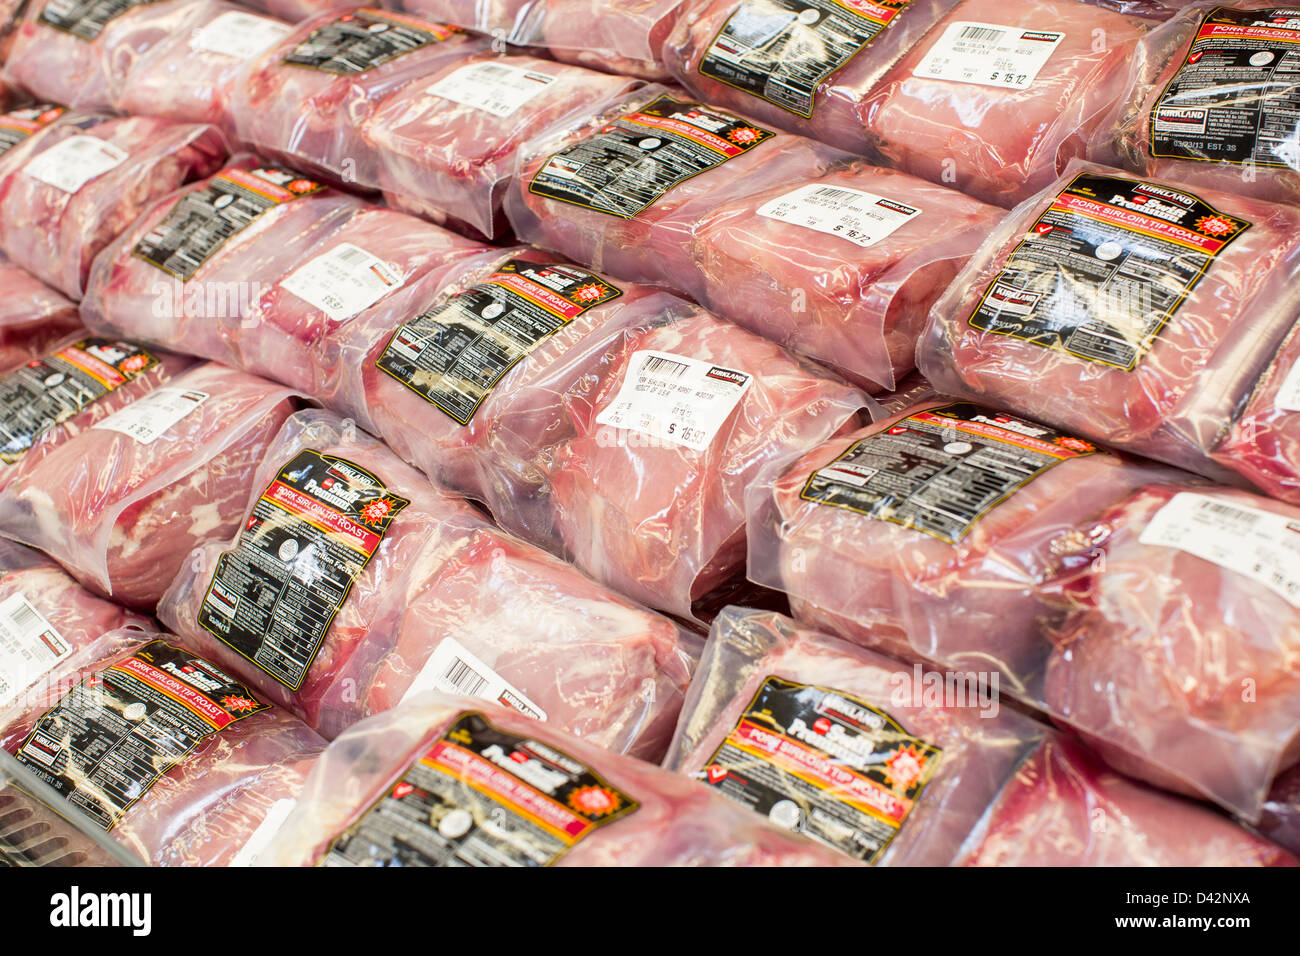 Pork shoulder roasts on display at a Costco Wholesale Warehouse Club. Stock Photo